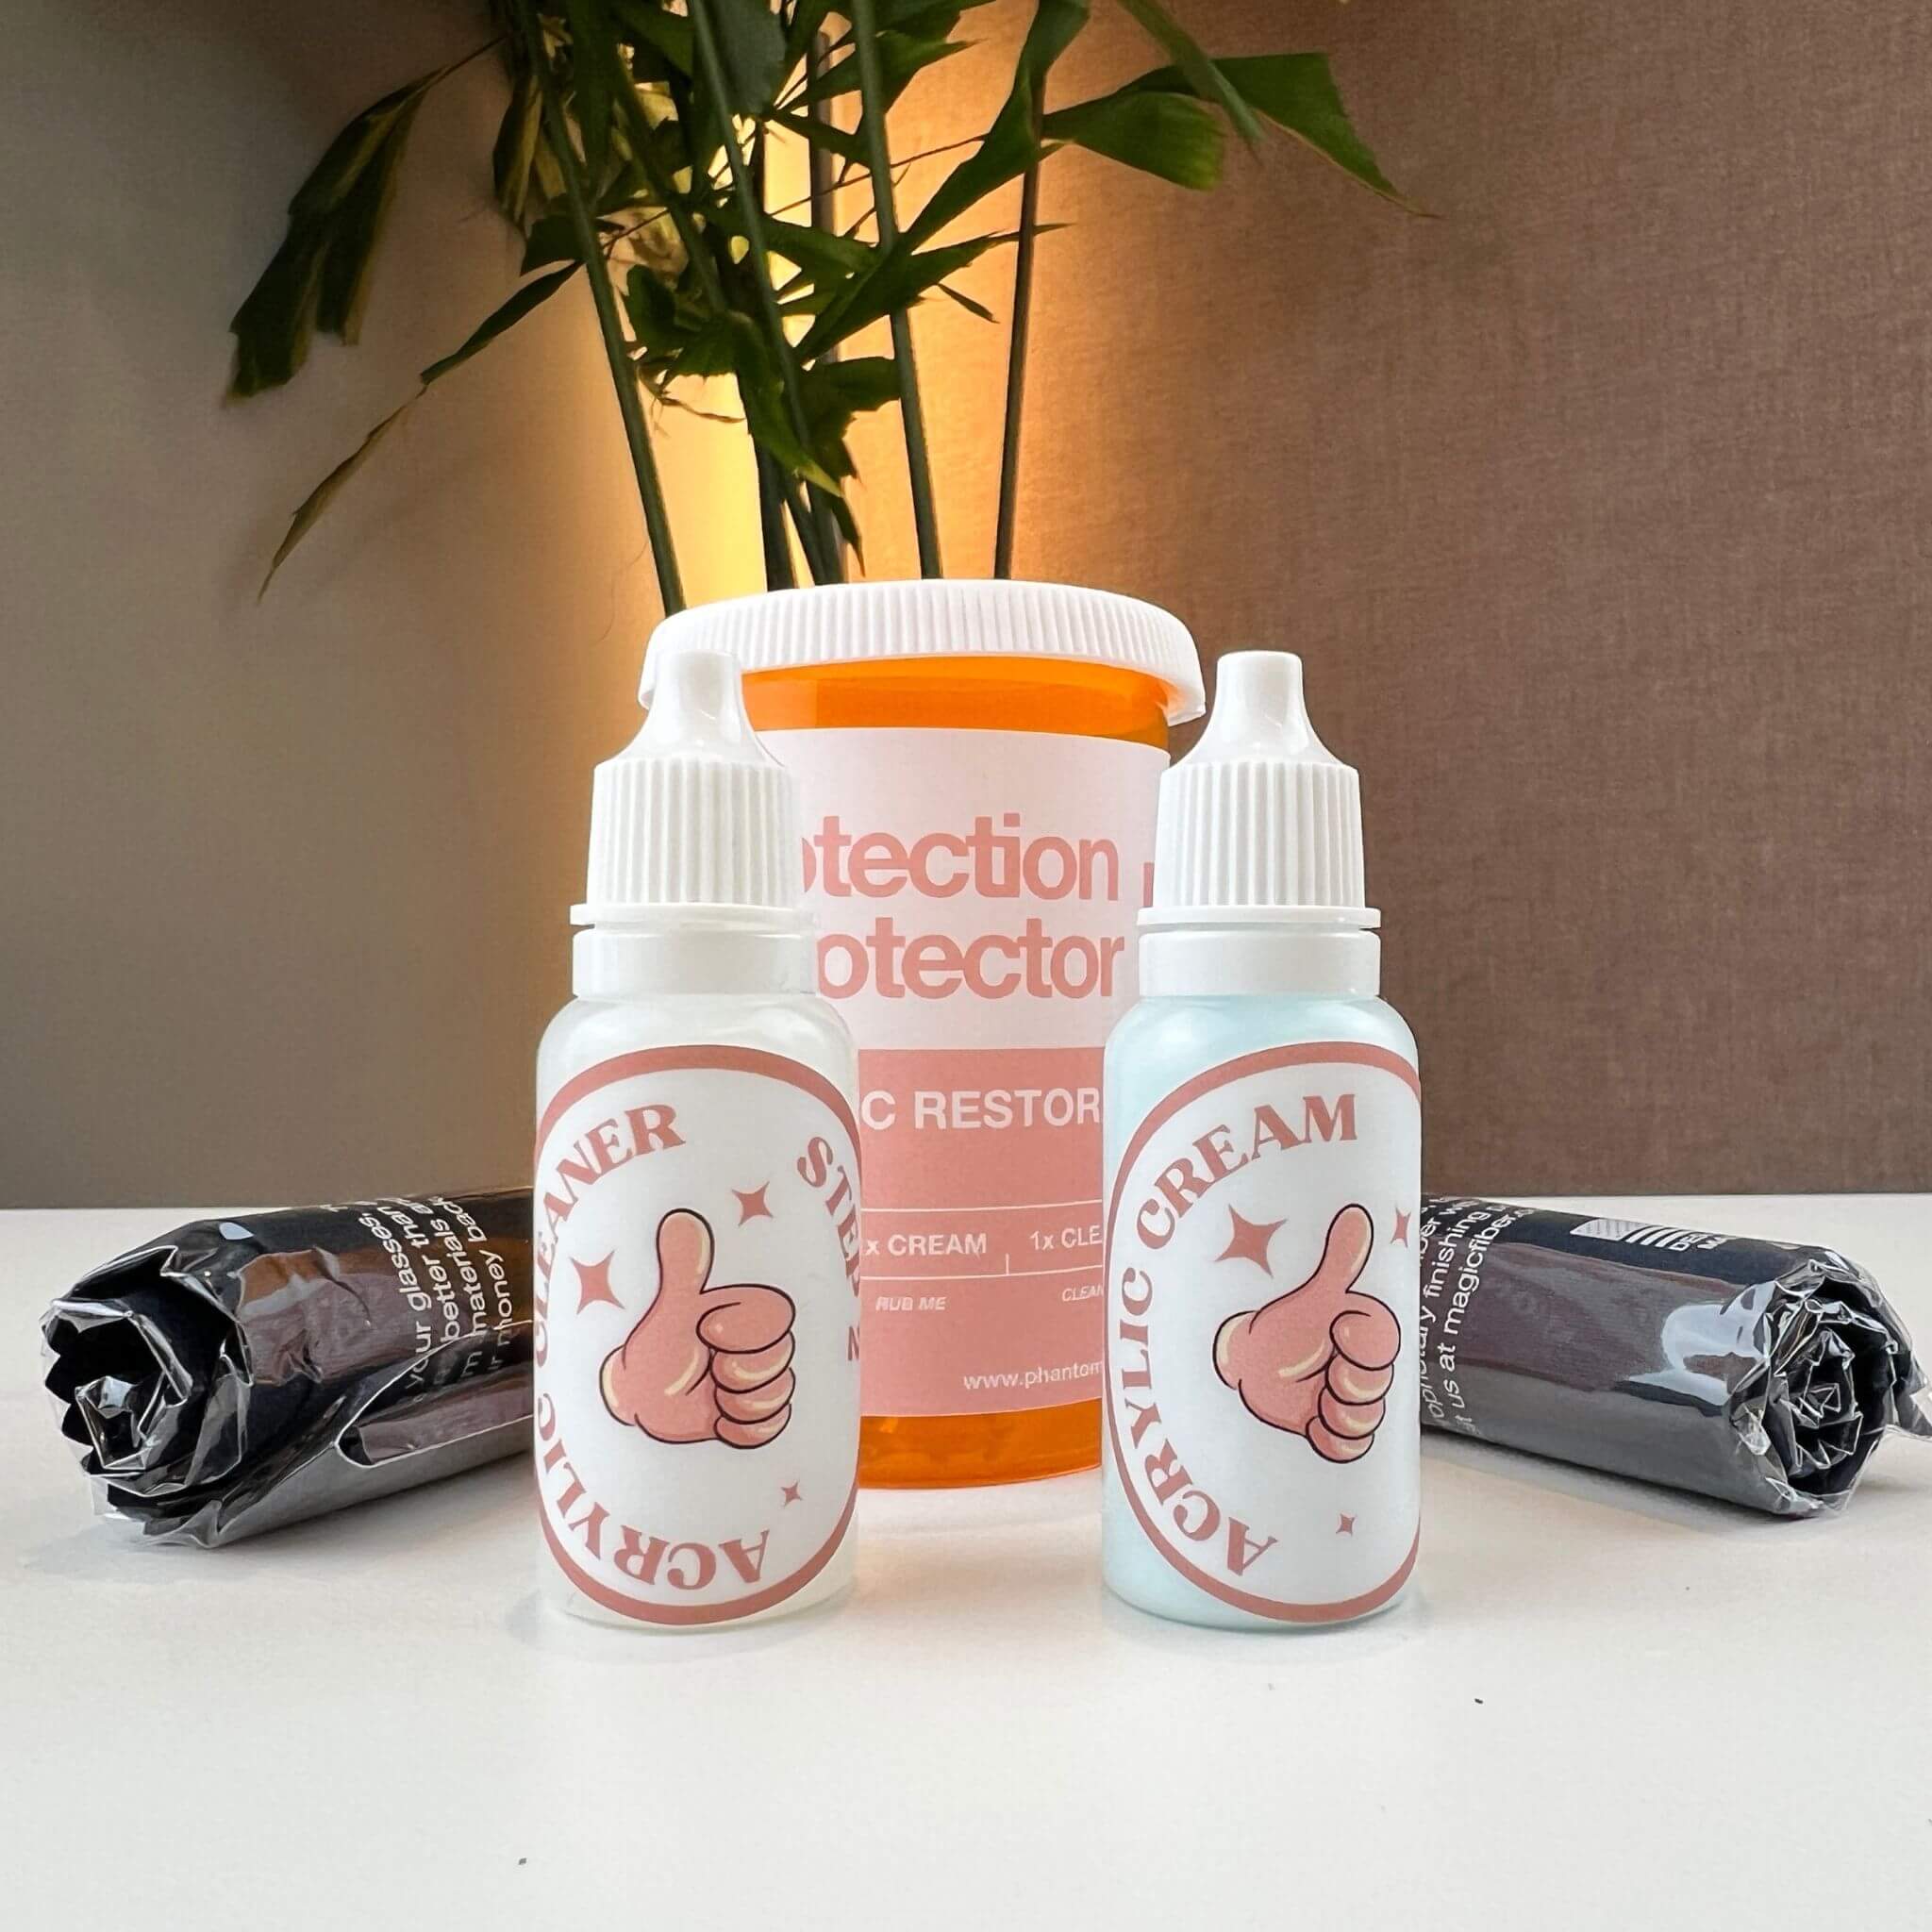 Acrylic Cleaning and Protection Kit